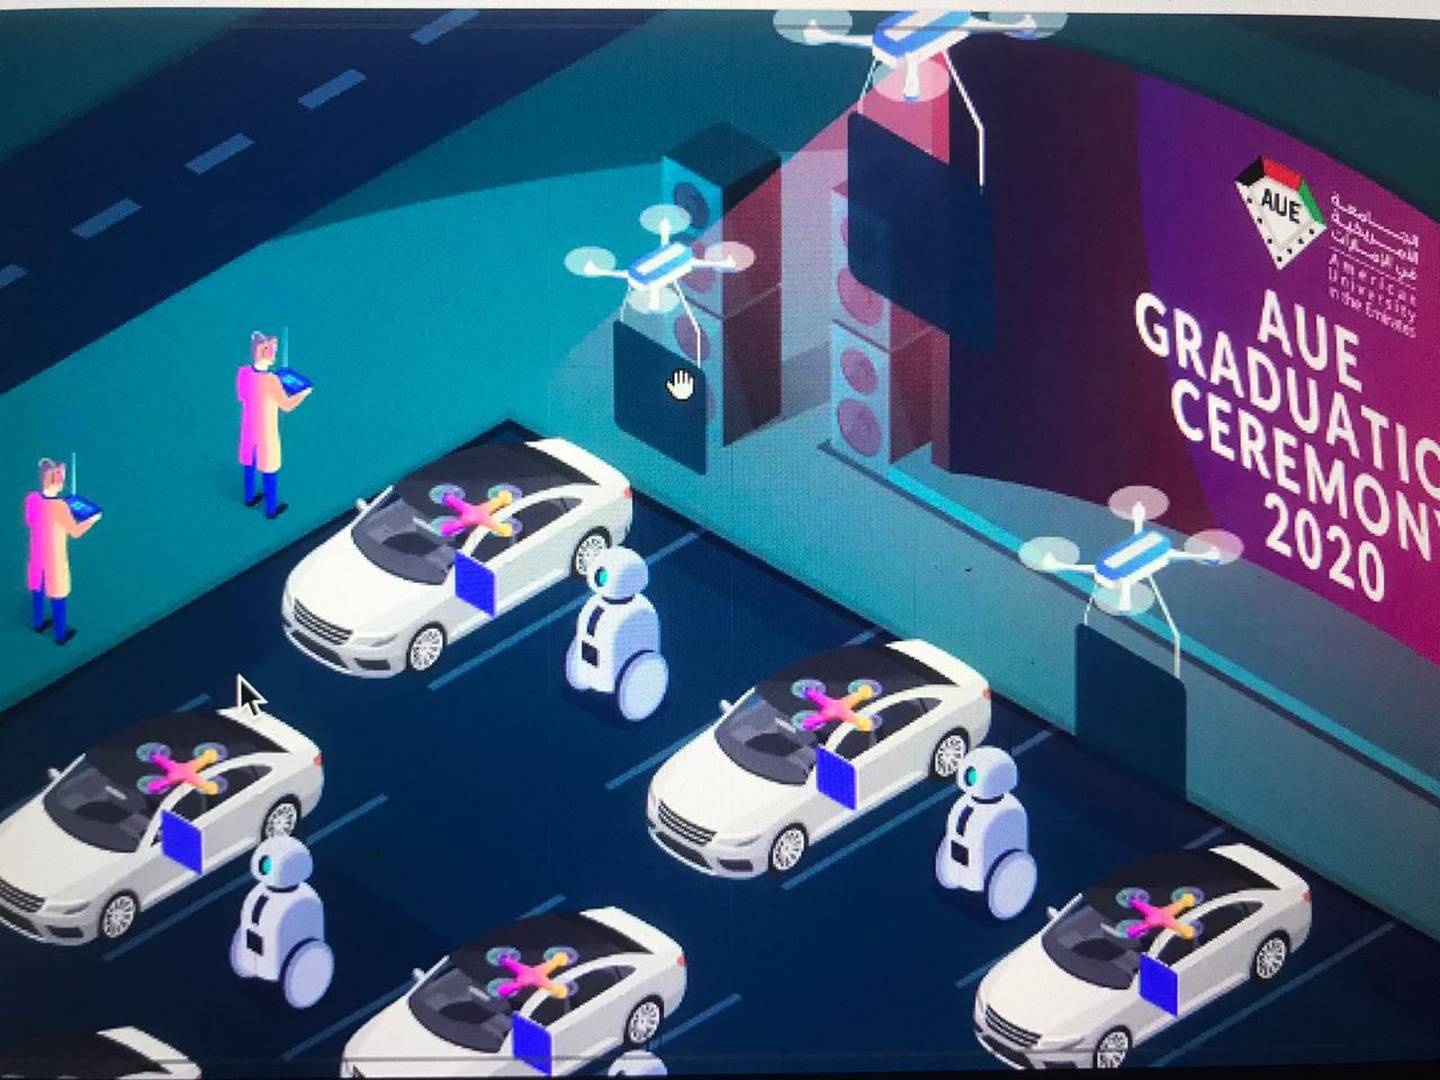 An illustration of the planned graduation ceremony that will use drones to deliver certificates to graduates of the American University in the Emirates. Courtesy: American University in the Emirates